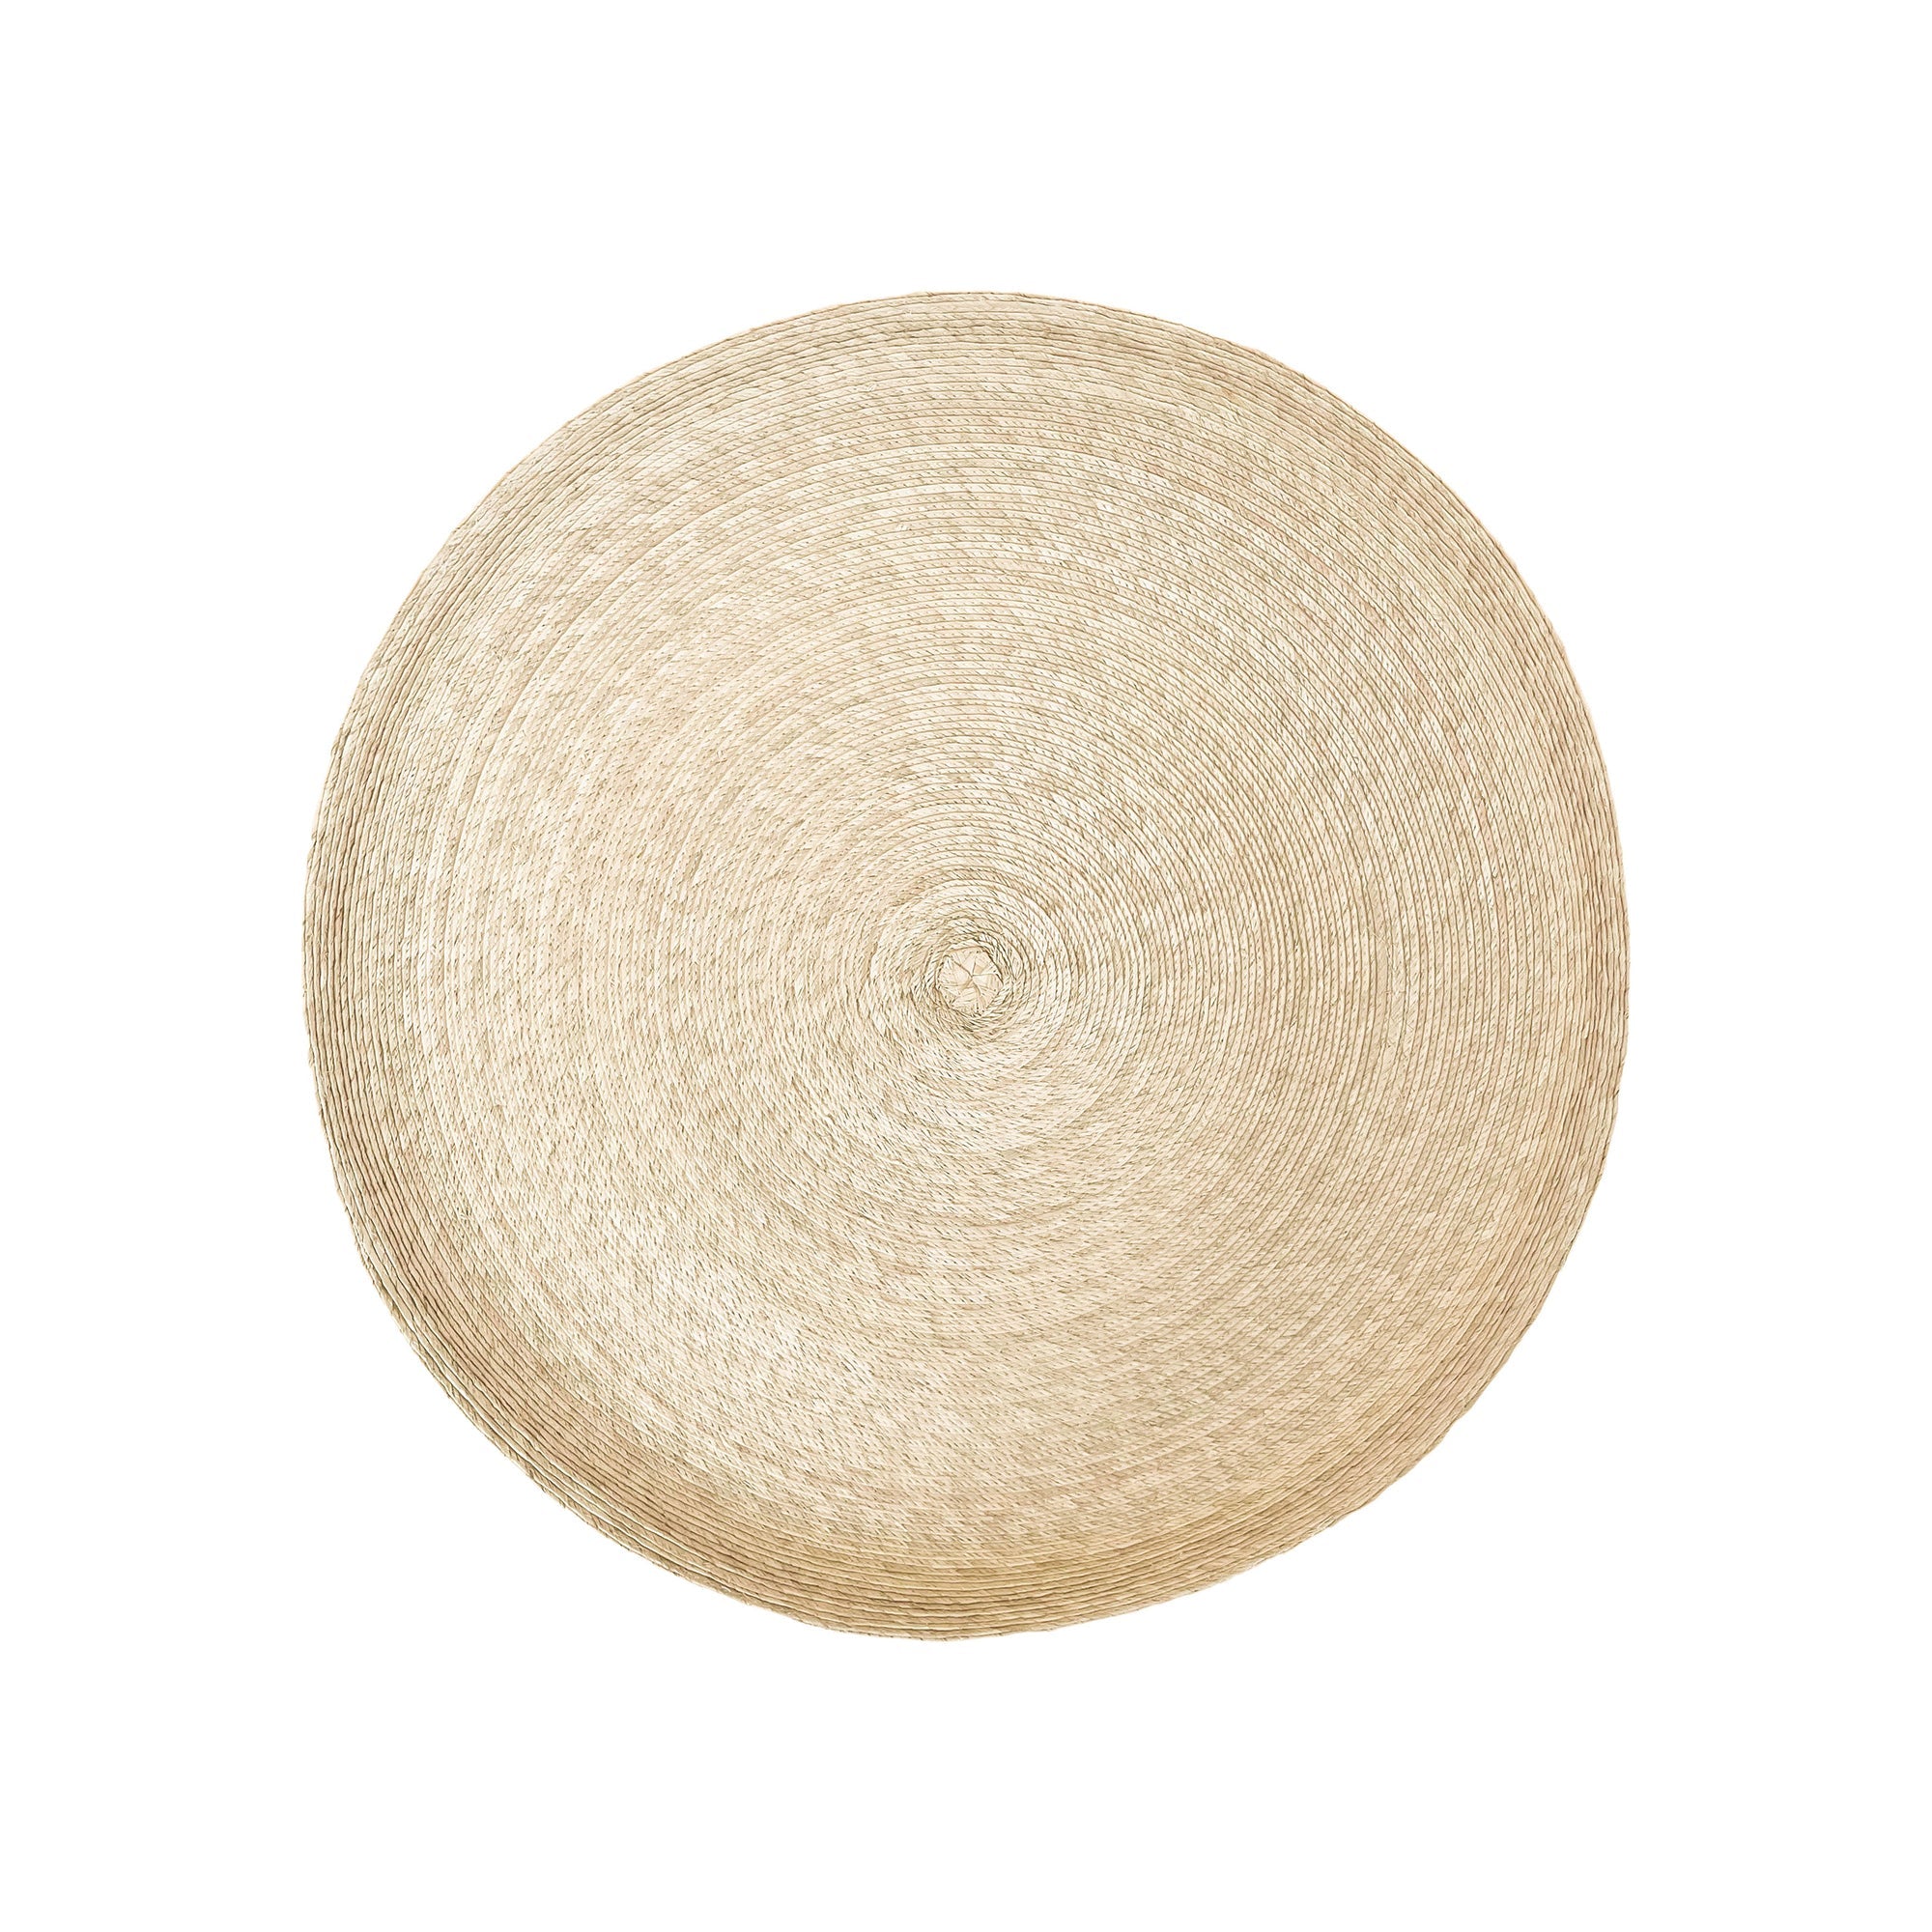 Round Handwoven Palm Tray | L Accents + Decor Palm OS 